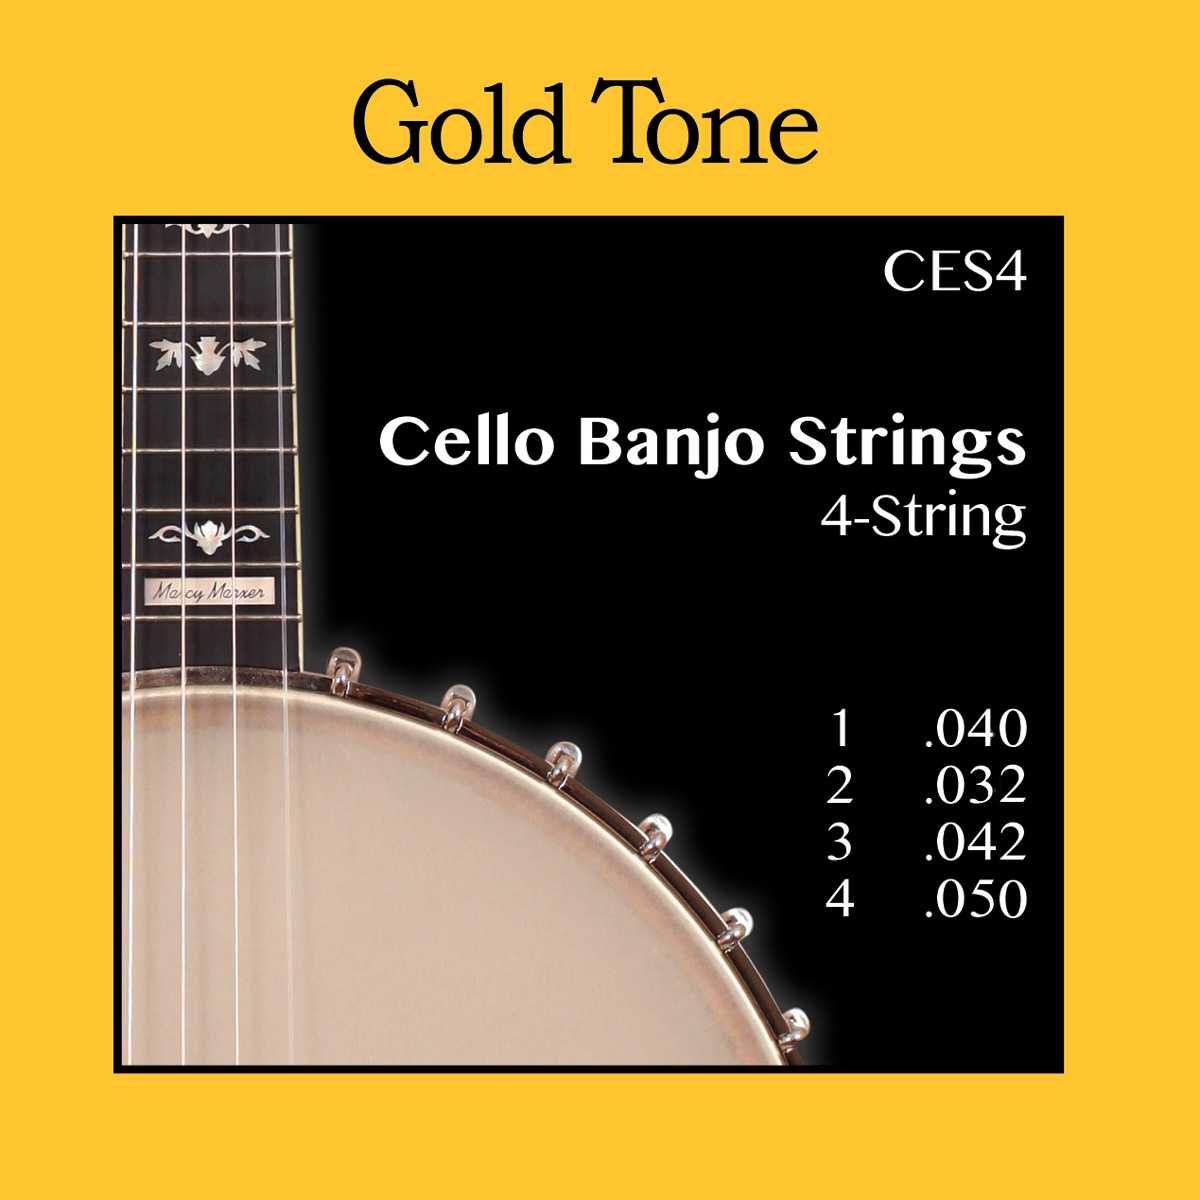 Image 2 of Gold Tone CES4 4-String Cello Banjo Strings - SKU# GTCB4 : Product Type Strings : Elderly Instruments